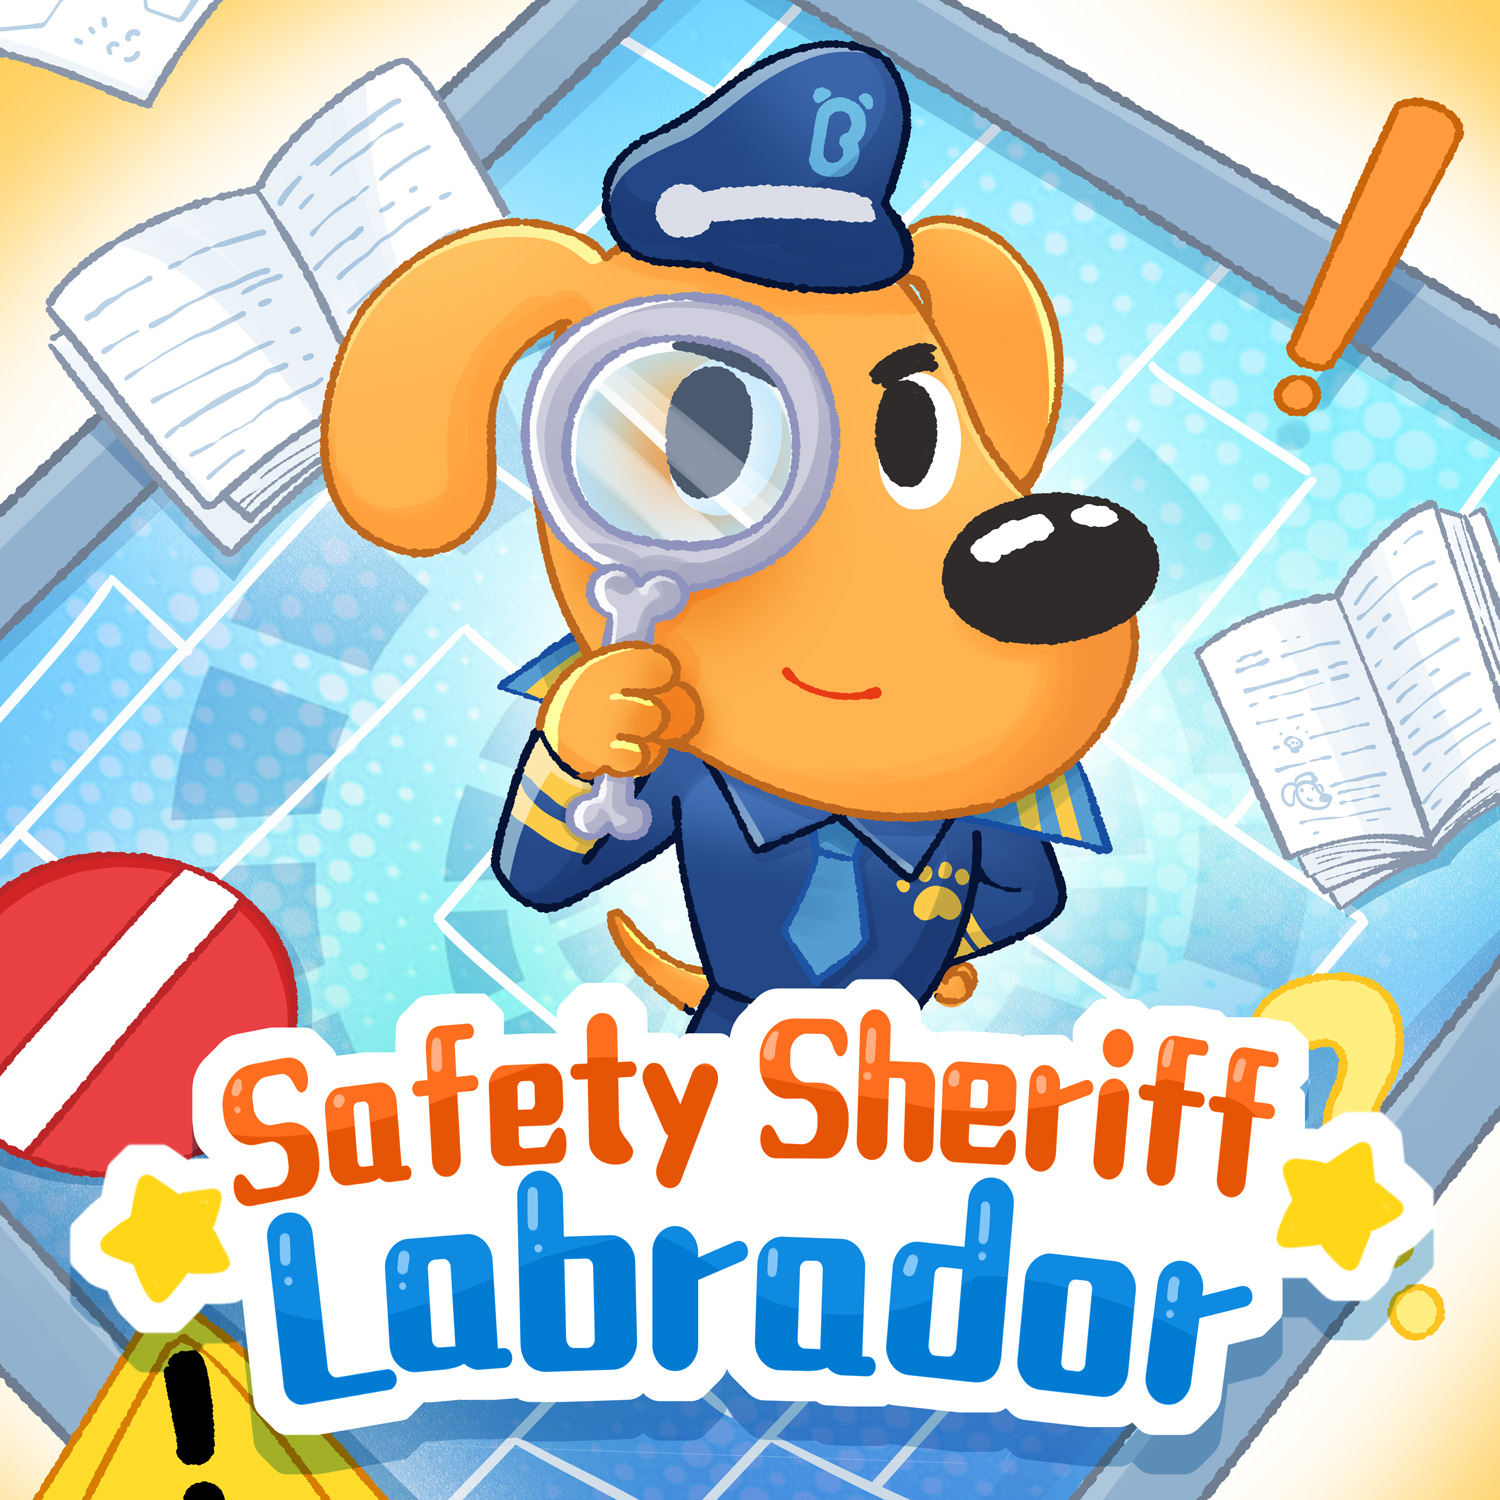 【Sheriff Labrador's Safety Tip! 】🚨Wear Protection for the Hot Sun